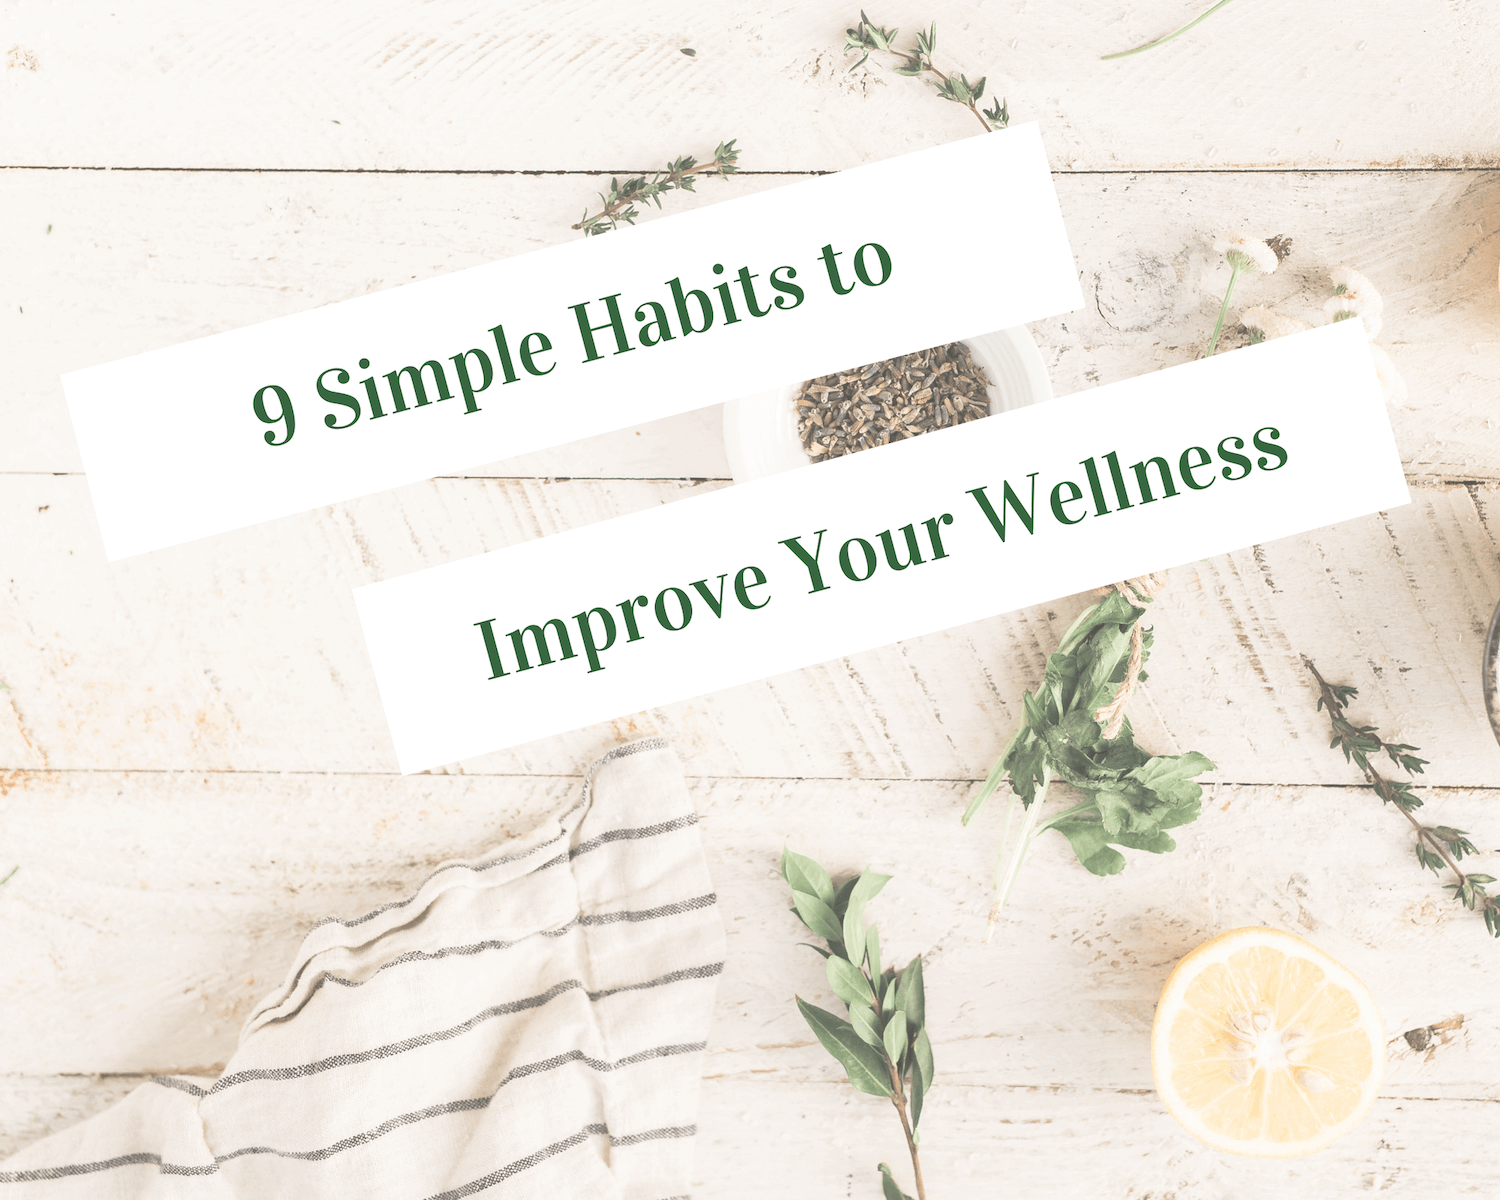 9 simple habits to improve your wellness featured image